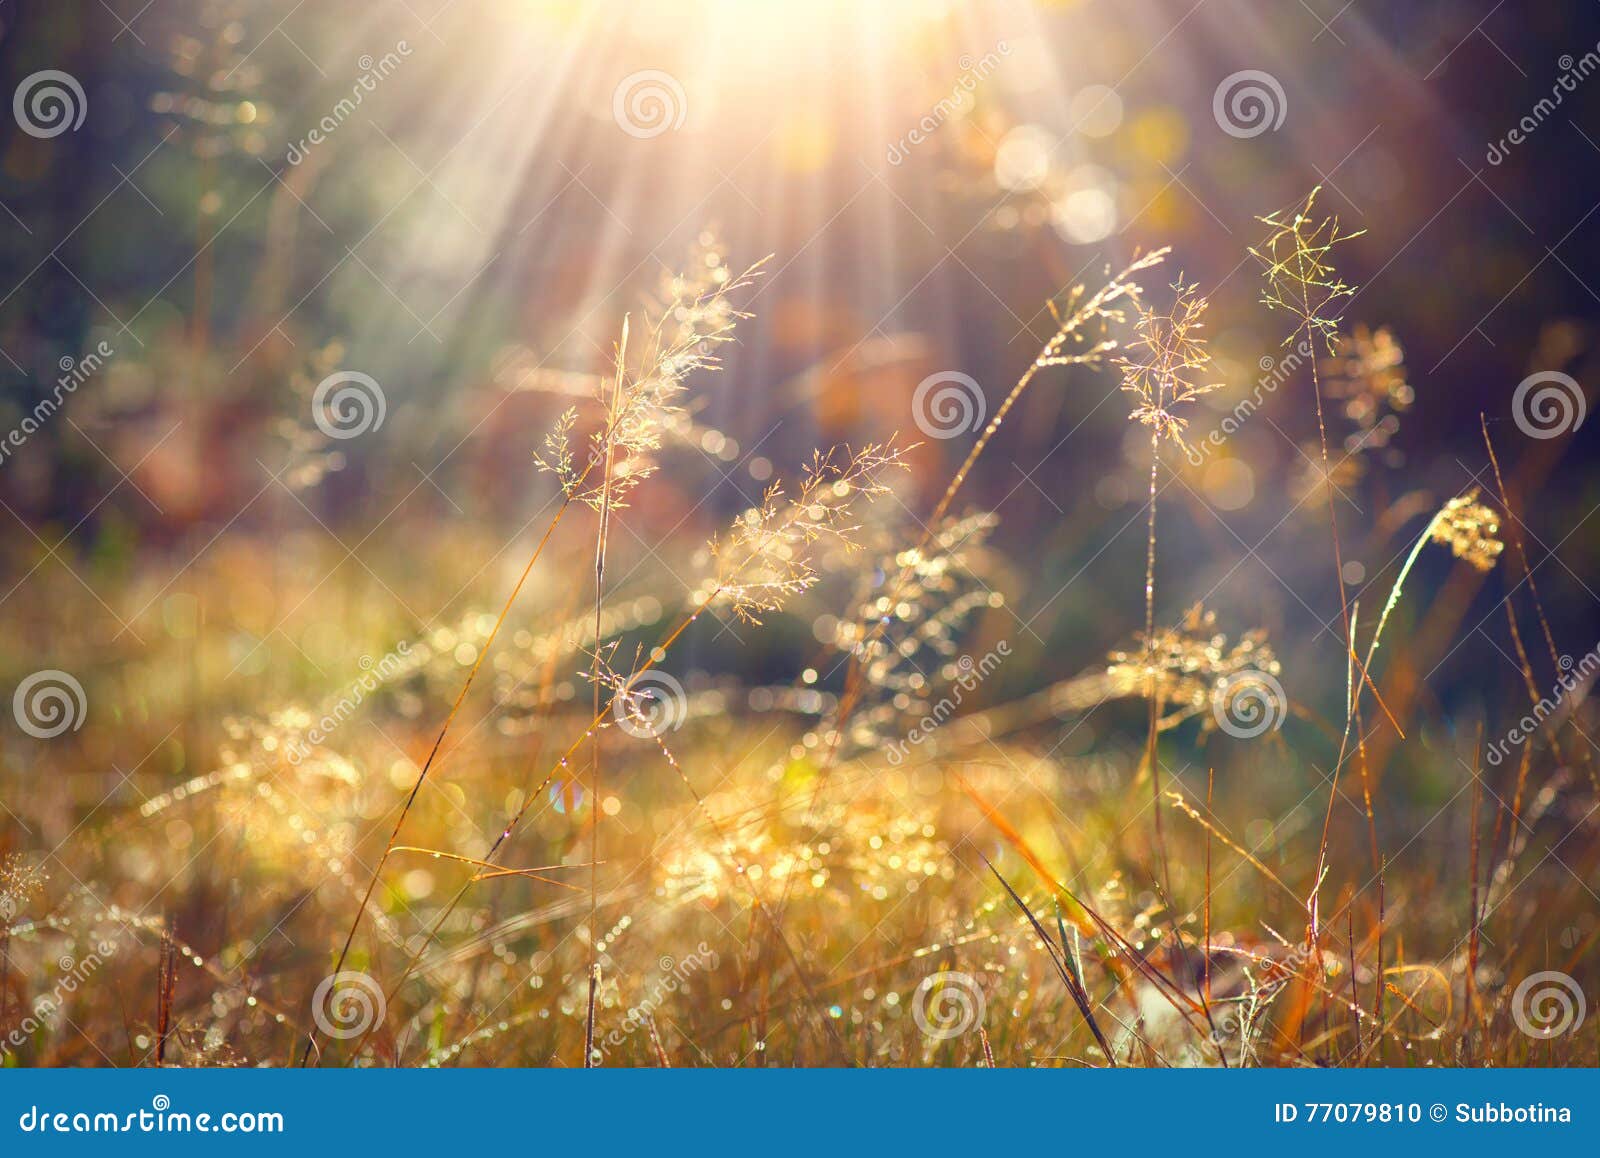 autumn grass with morning dew in sunlight closeup